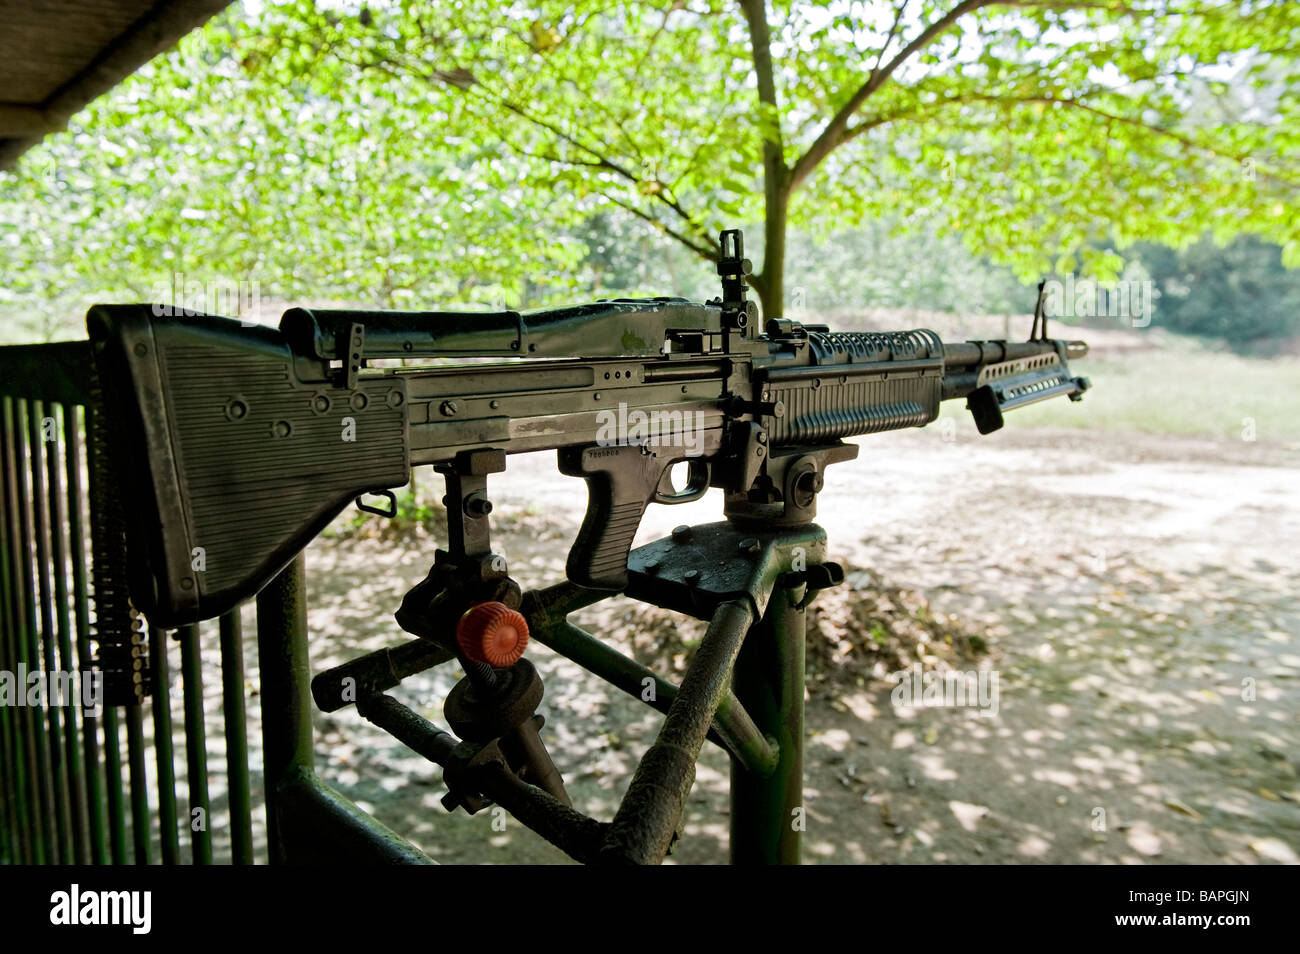 Visitors and Tourists can fire this captured American M60 Machine Gun at the Cu Chi Tunnel Complex, Ho Chi Minh City, Vietnam Stock Photo